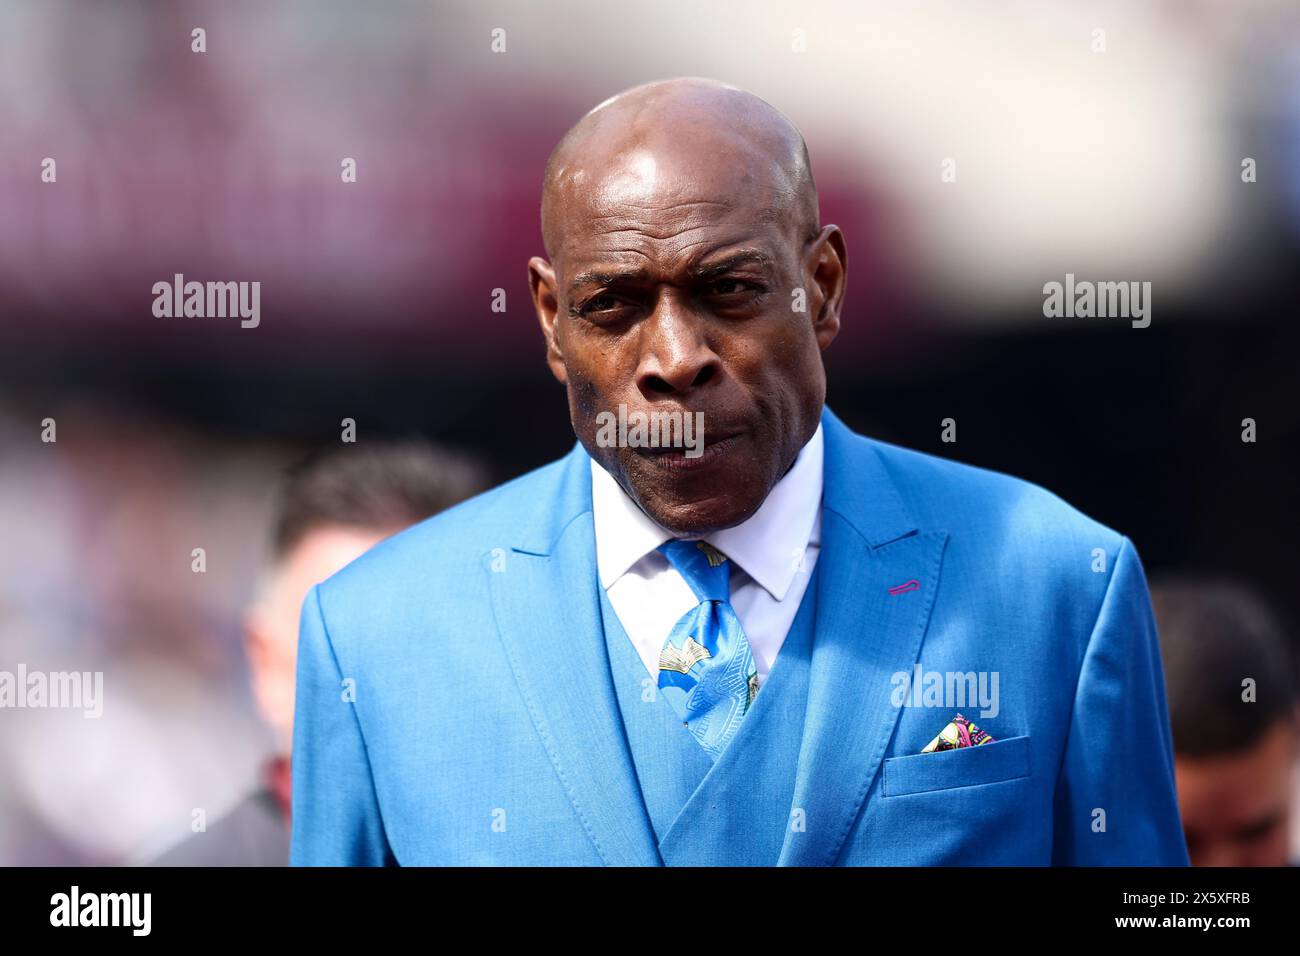 London Stadium, Stratford on Saturday 11th May 2024.Former boxer Frank Bruno during the Premier League match between West Ham United and Luton Town at the London Stadium, Stratford on Saturday 11th May 2024. (Photo: Tom West | MI News) Credit: MI News & Sport /Alamy Live News Stock Photo